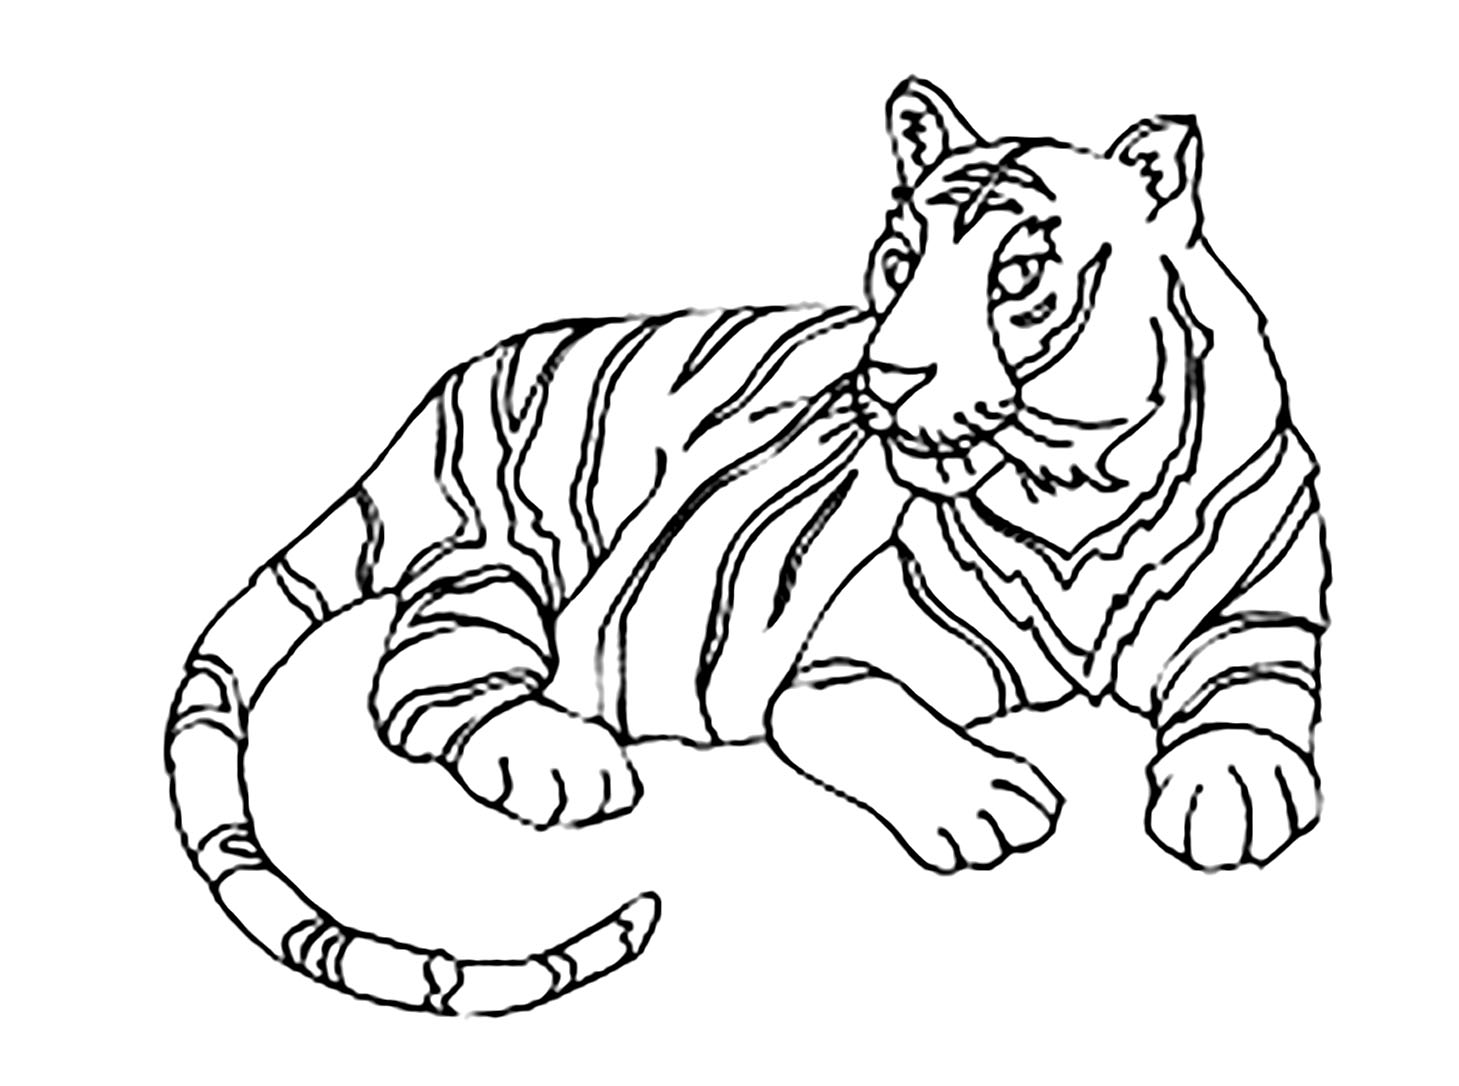 Tigers to color for children Tigers Kids Coloring Pages